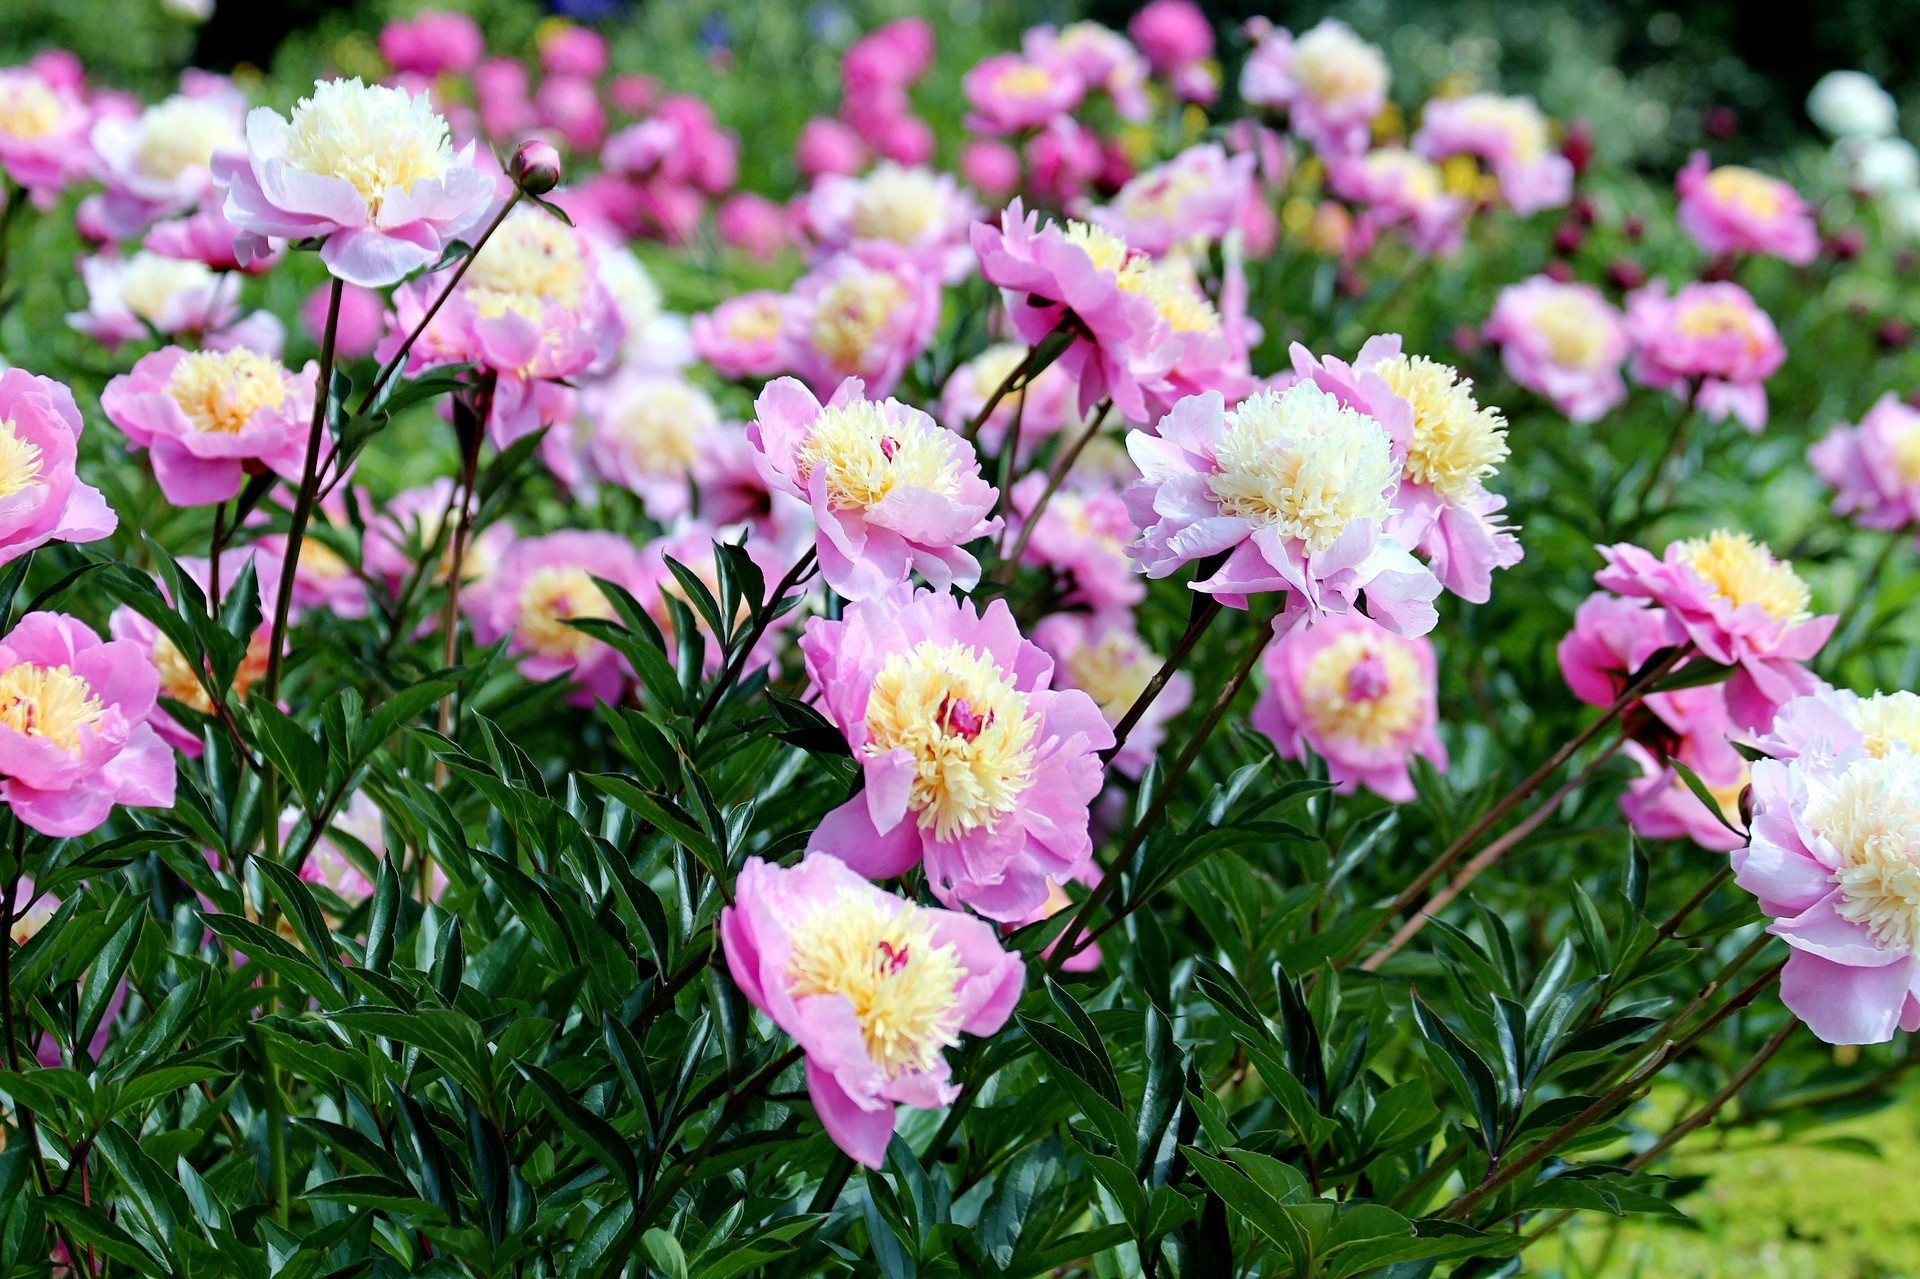 Peonies: Planting, Growing, And Caring For Peony Flowers | The Old